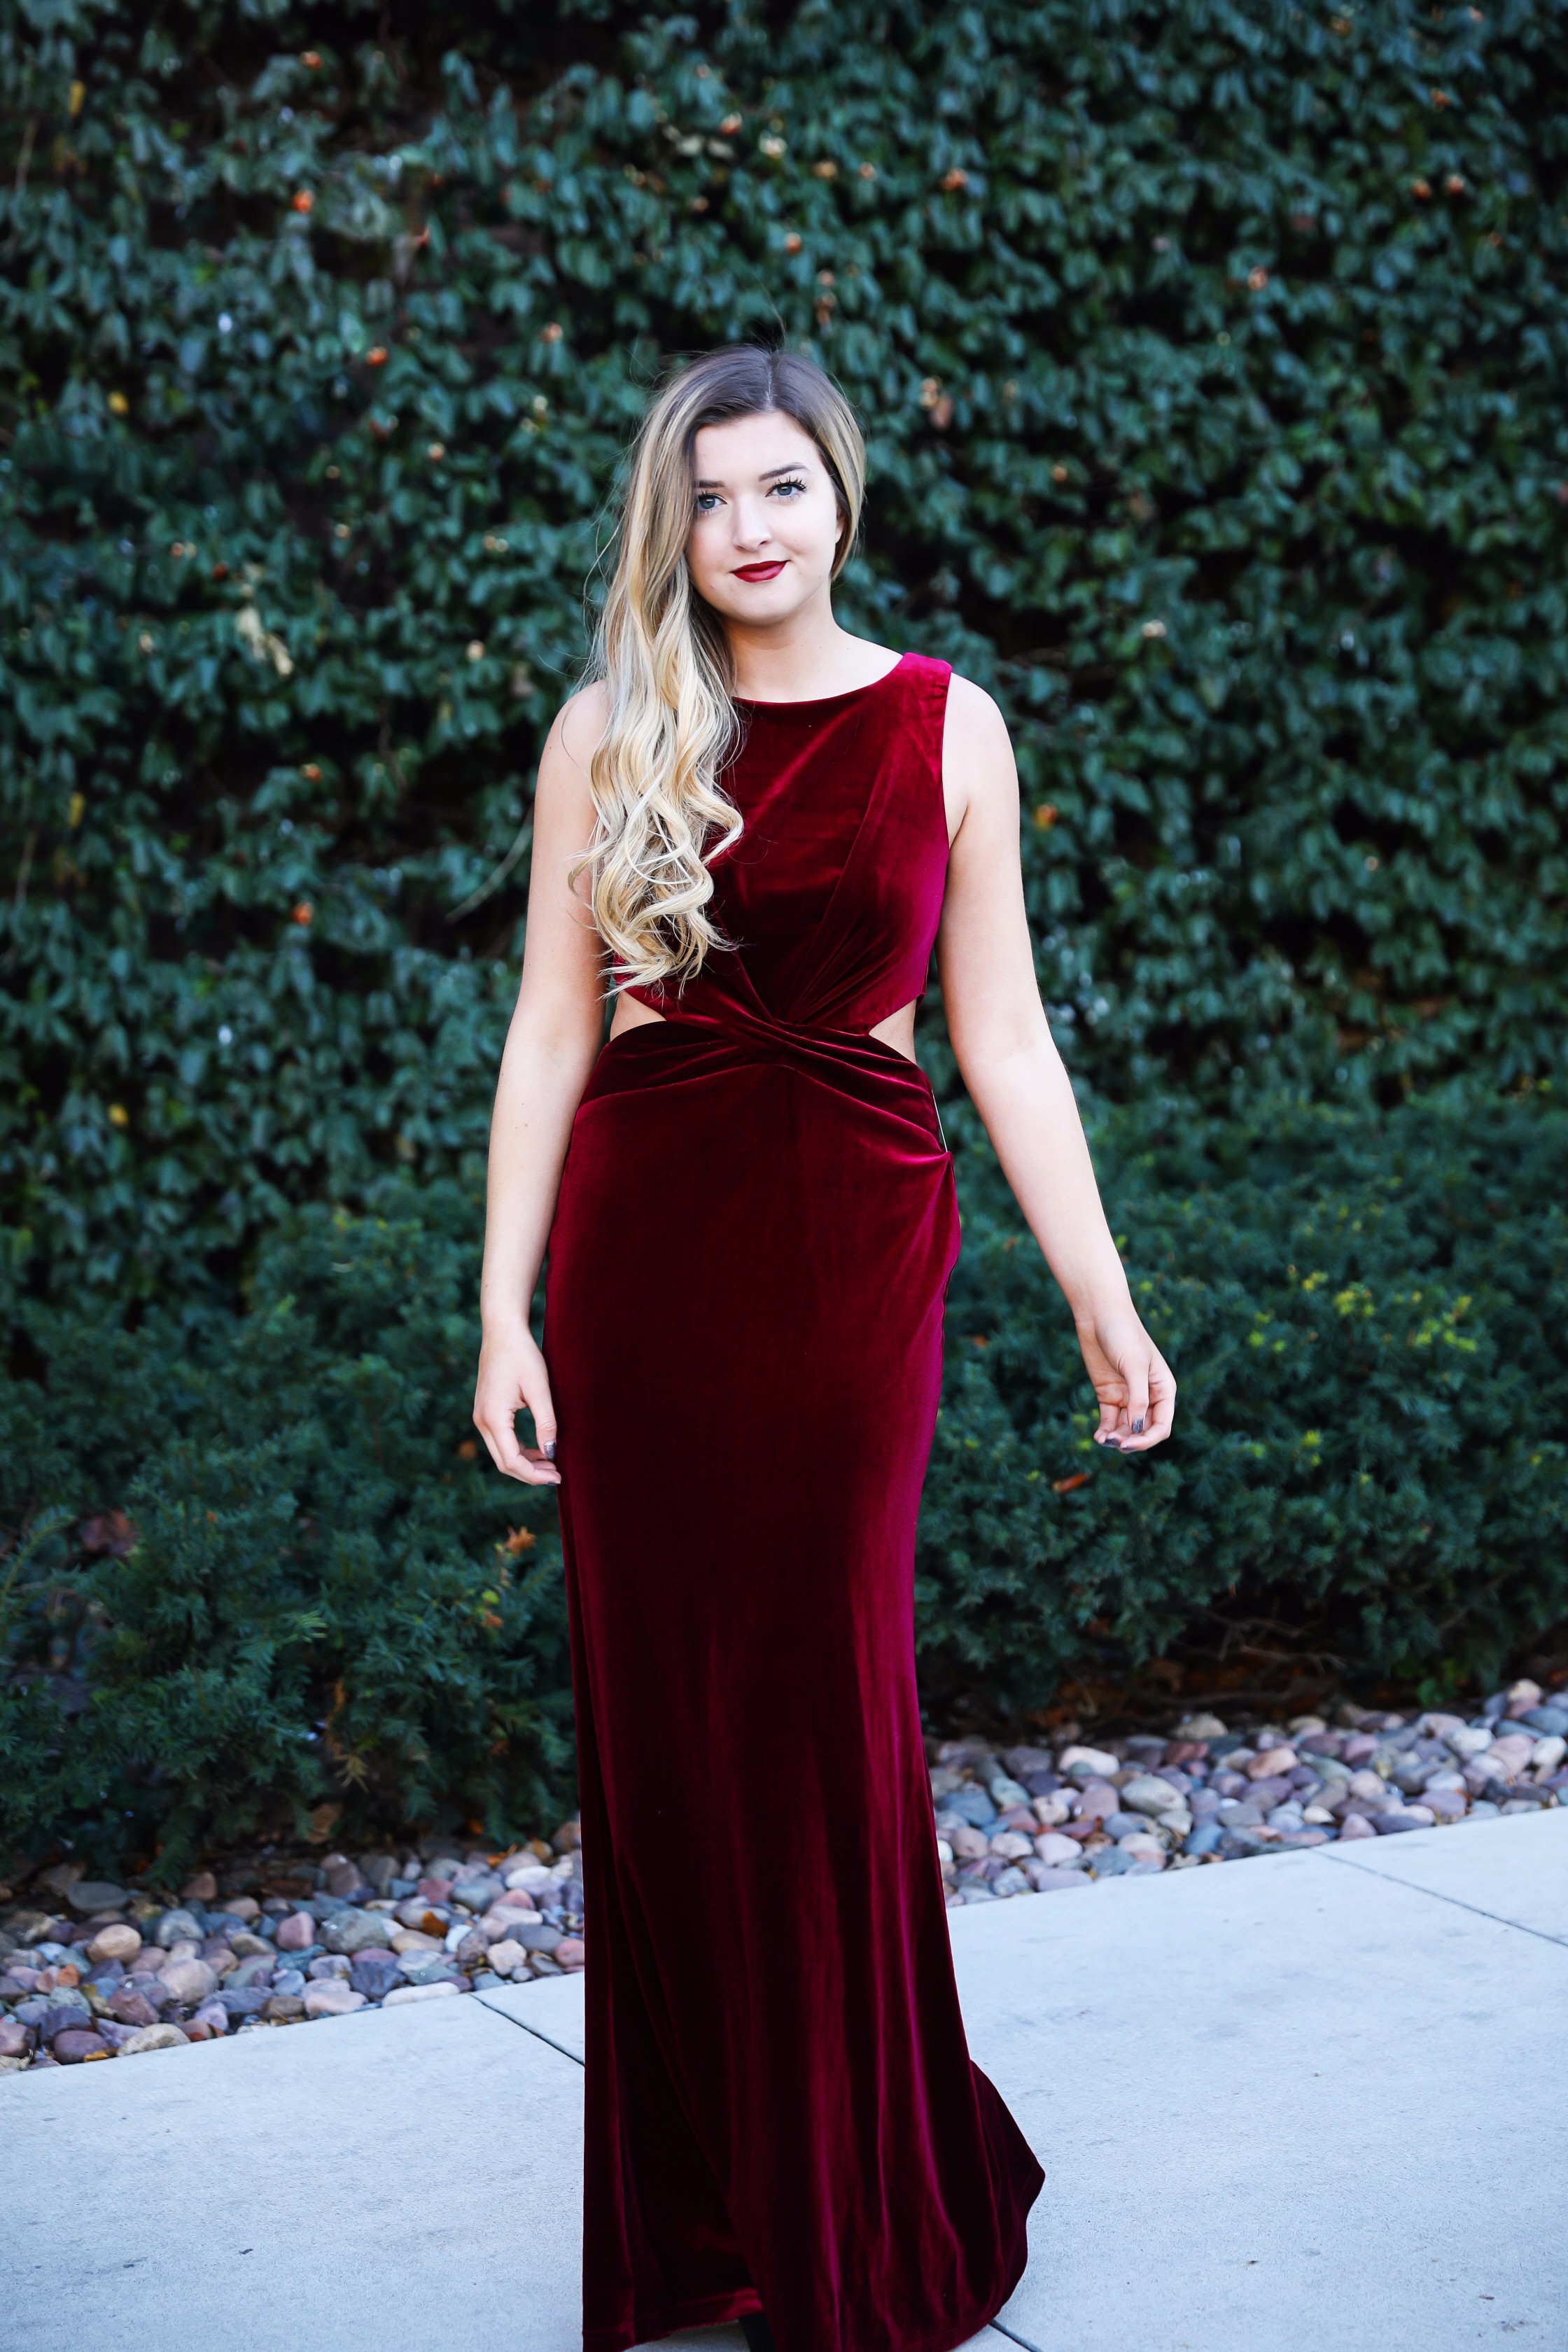 Holiday party dress idea! I love this elegant red velvet maxi dress, perfect for christmas coctail dress! Details on fashion blog daily dose of charm by lauren lindmark